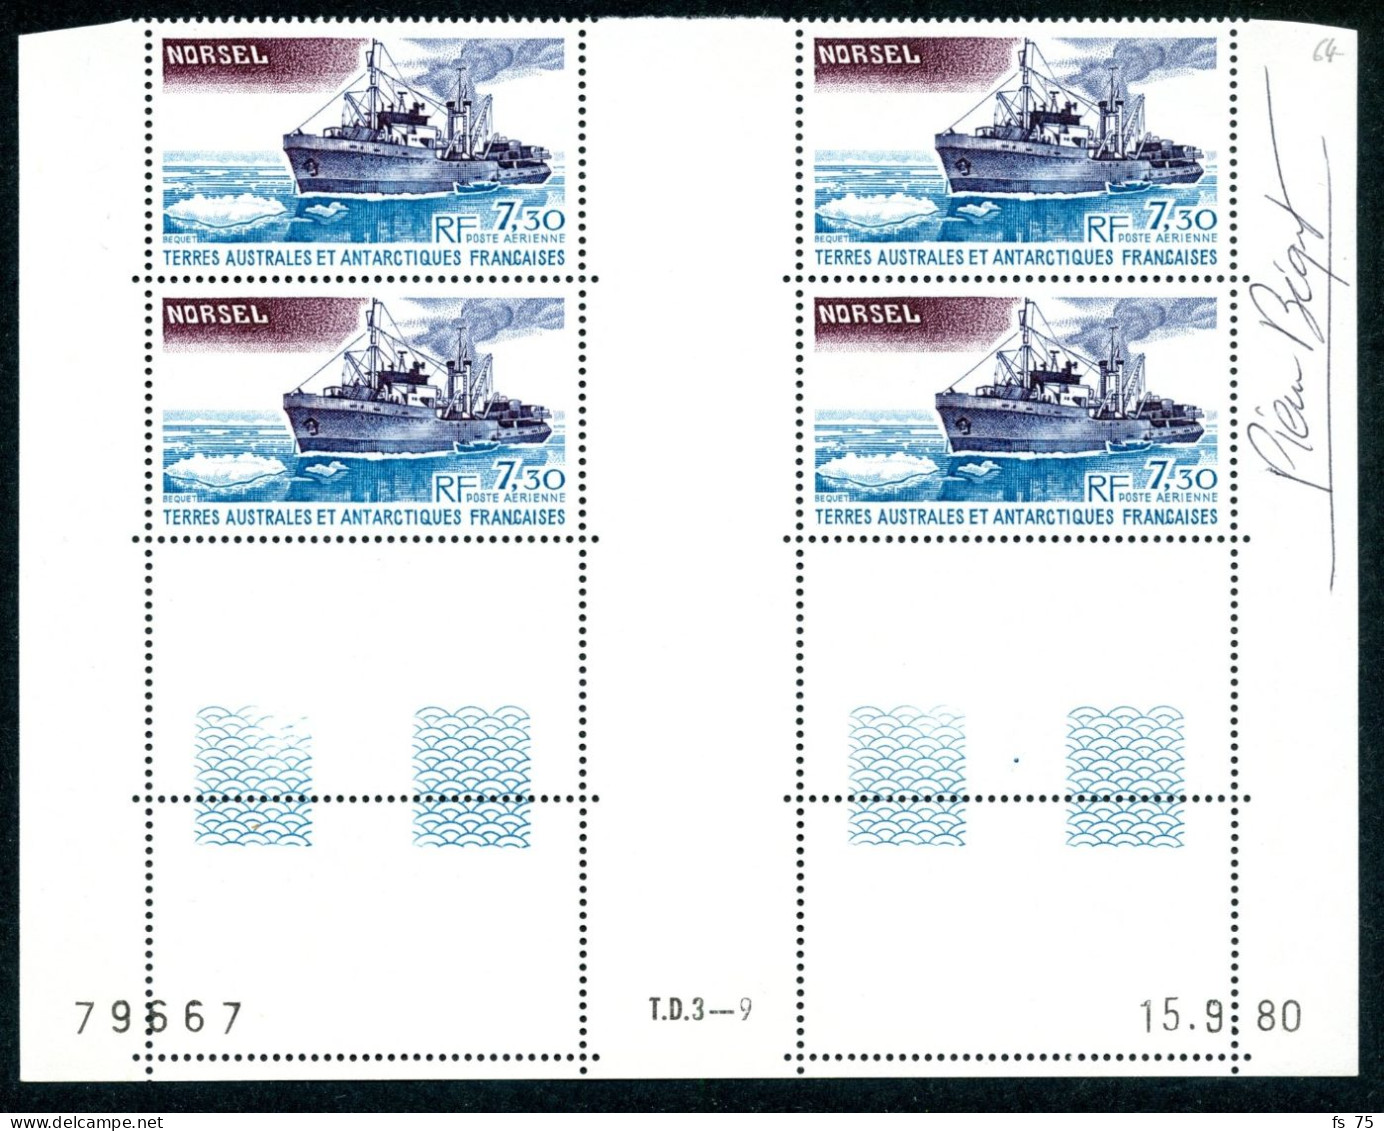 TAAF - PA N°64 -  NORSEL - BLOC DE 4 - COIN DATE - SIGNE P. BEQUET - Nuovi